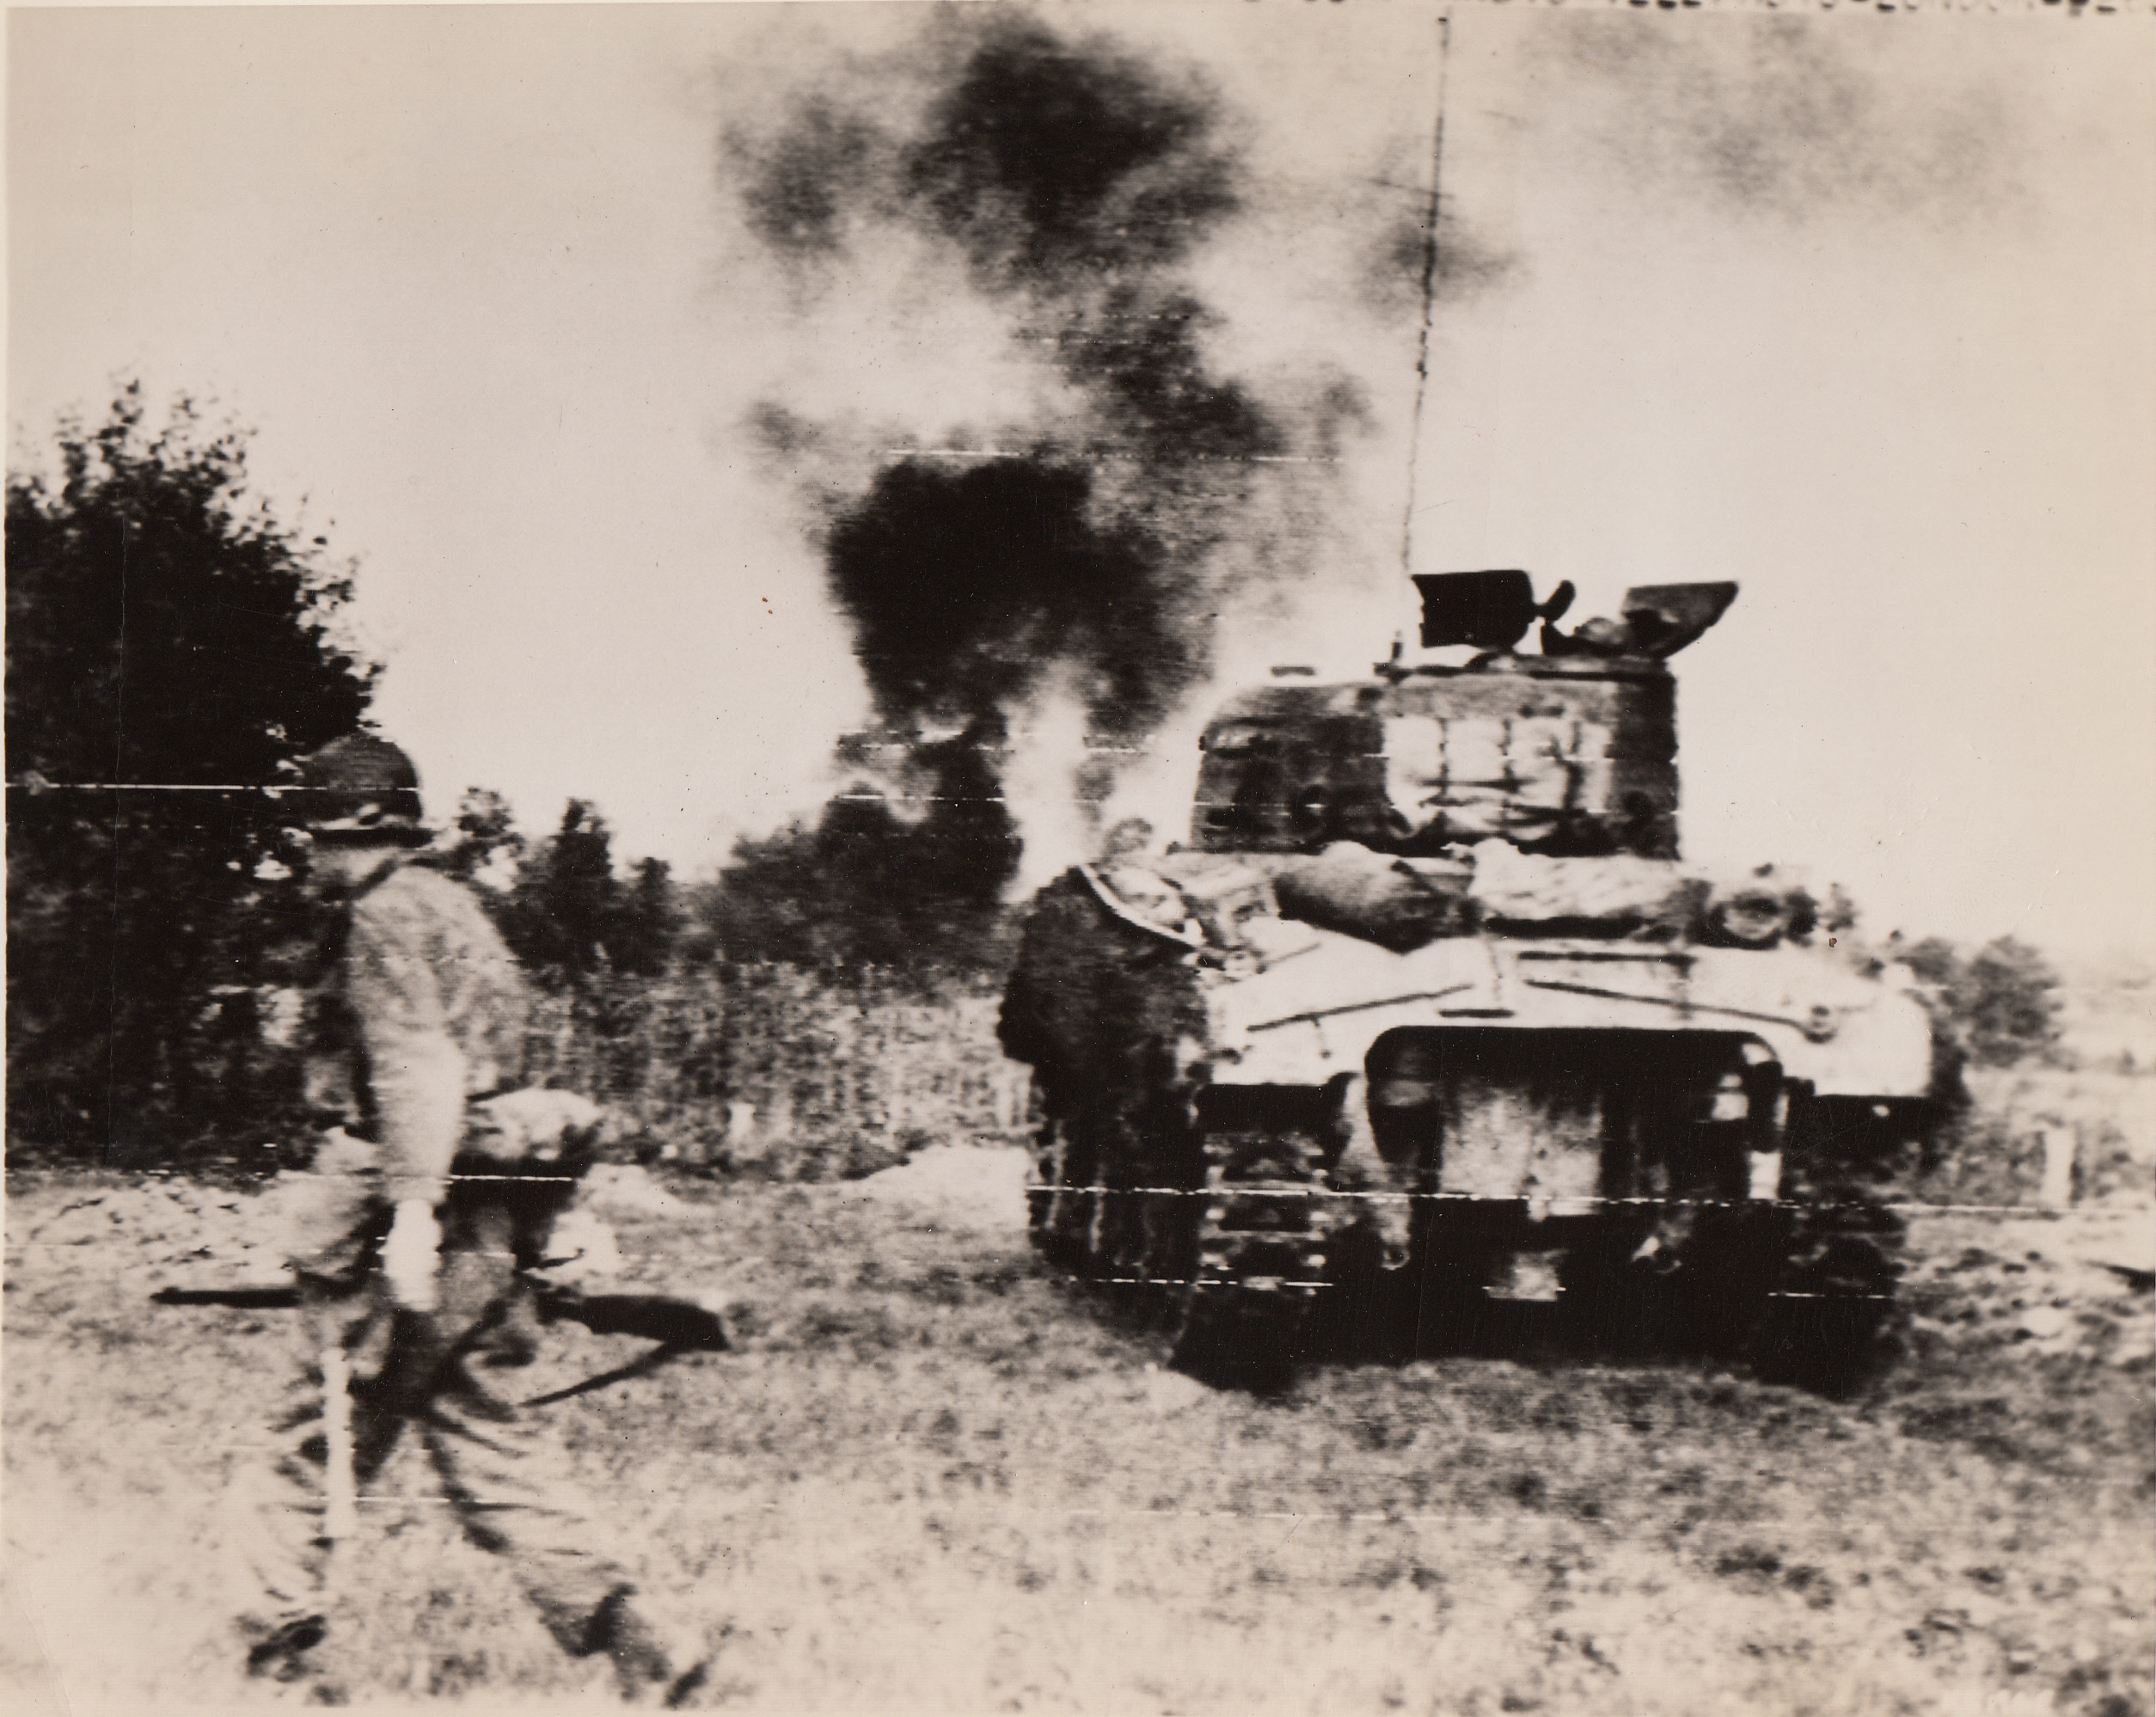 Yanks Advance in France, 9/25/1944. Americans forces with tank support, advance toward the bank of the Meurth River in France.;